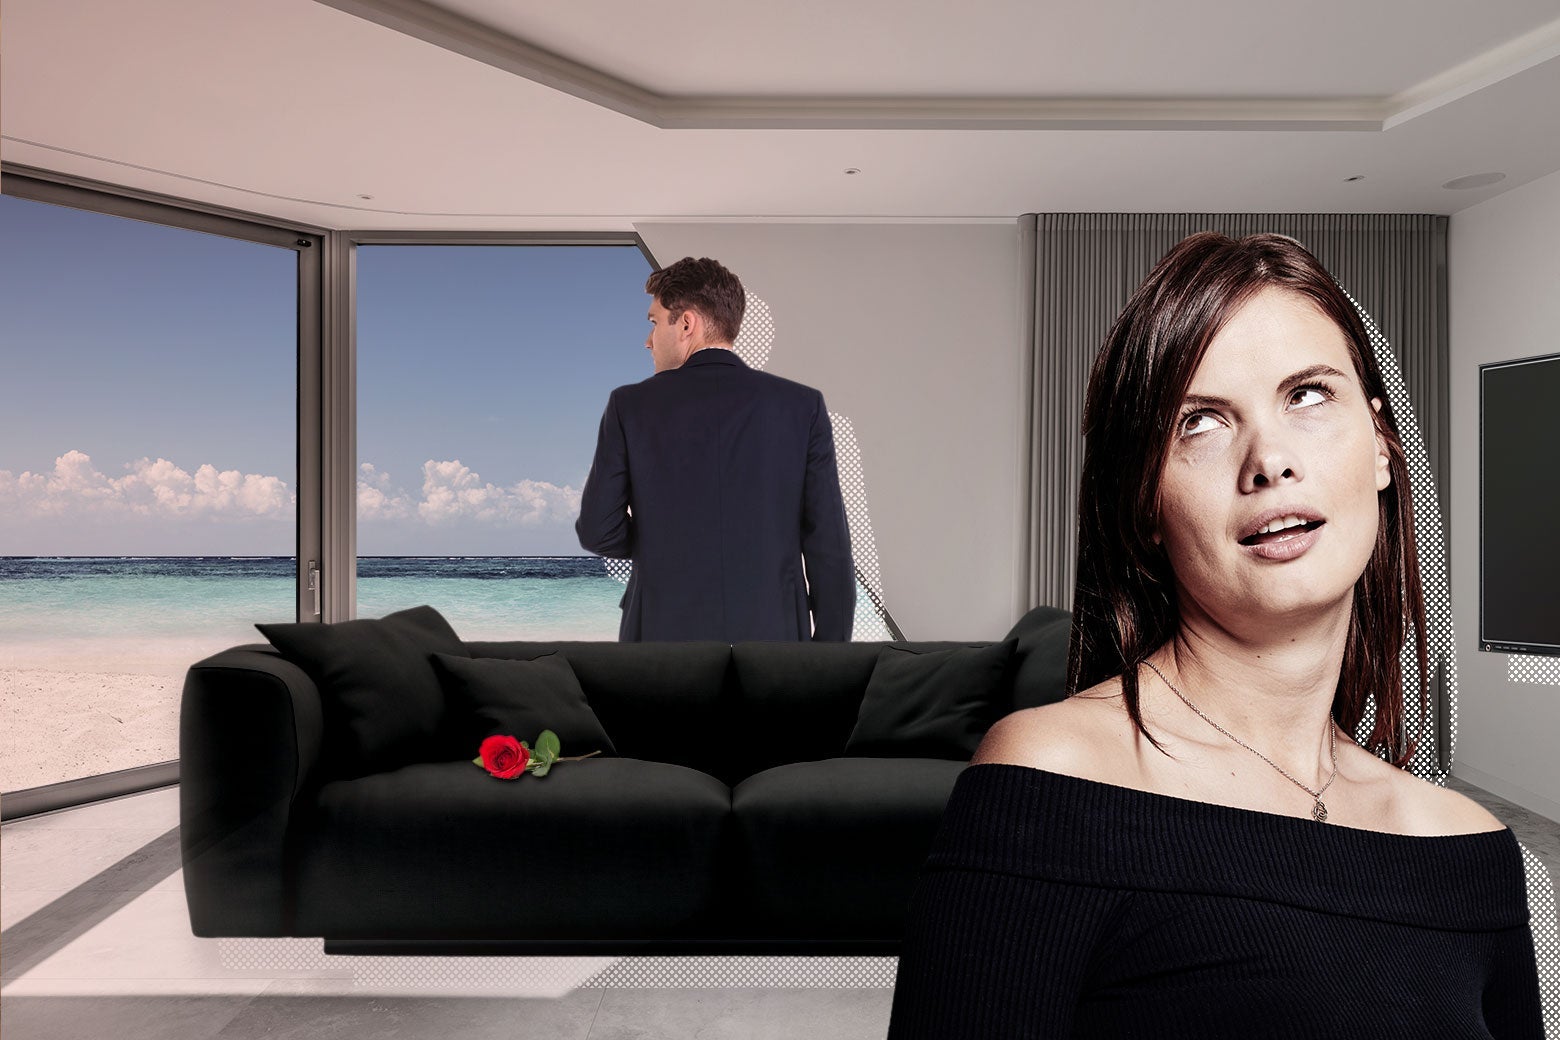 A collage image depicts a condo with ocean views, a black couch, and a big TV. A man in a suit is in the background and a woman in the foreground rolls her eyes.